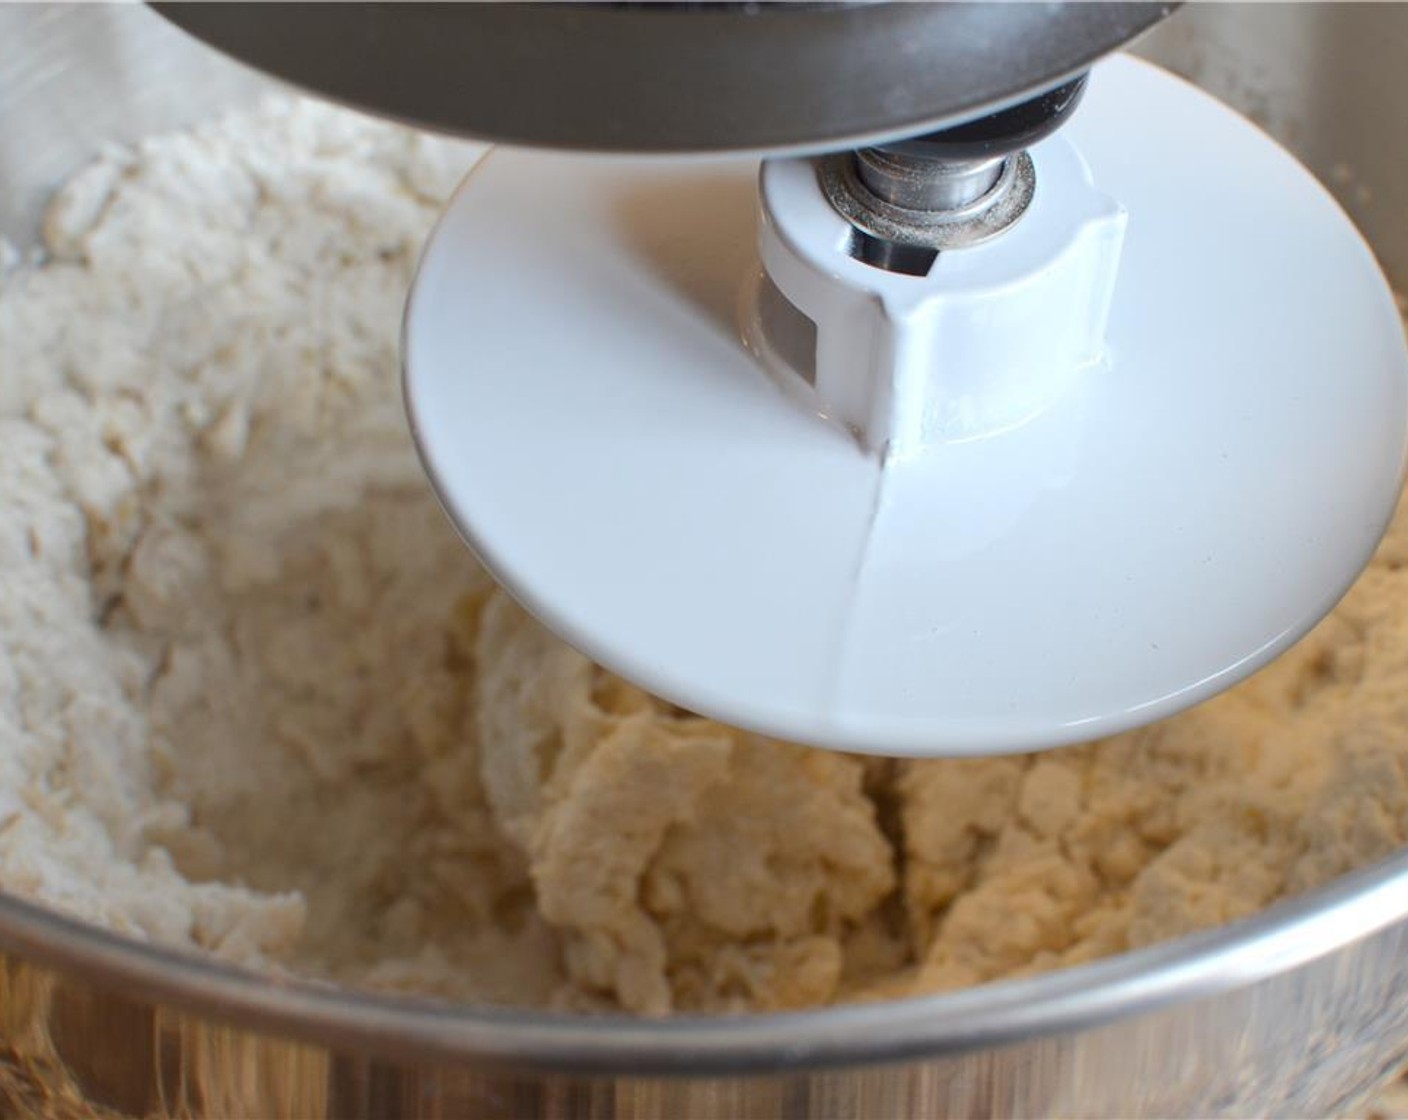 step 4 Add all the flour to the yeast mixture and with the dough hook attachment, turn the mixer to medium speed until a smooth and elastic ball forms (about 5-6 minutes).